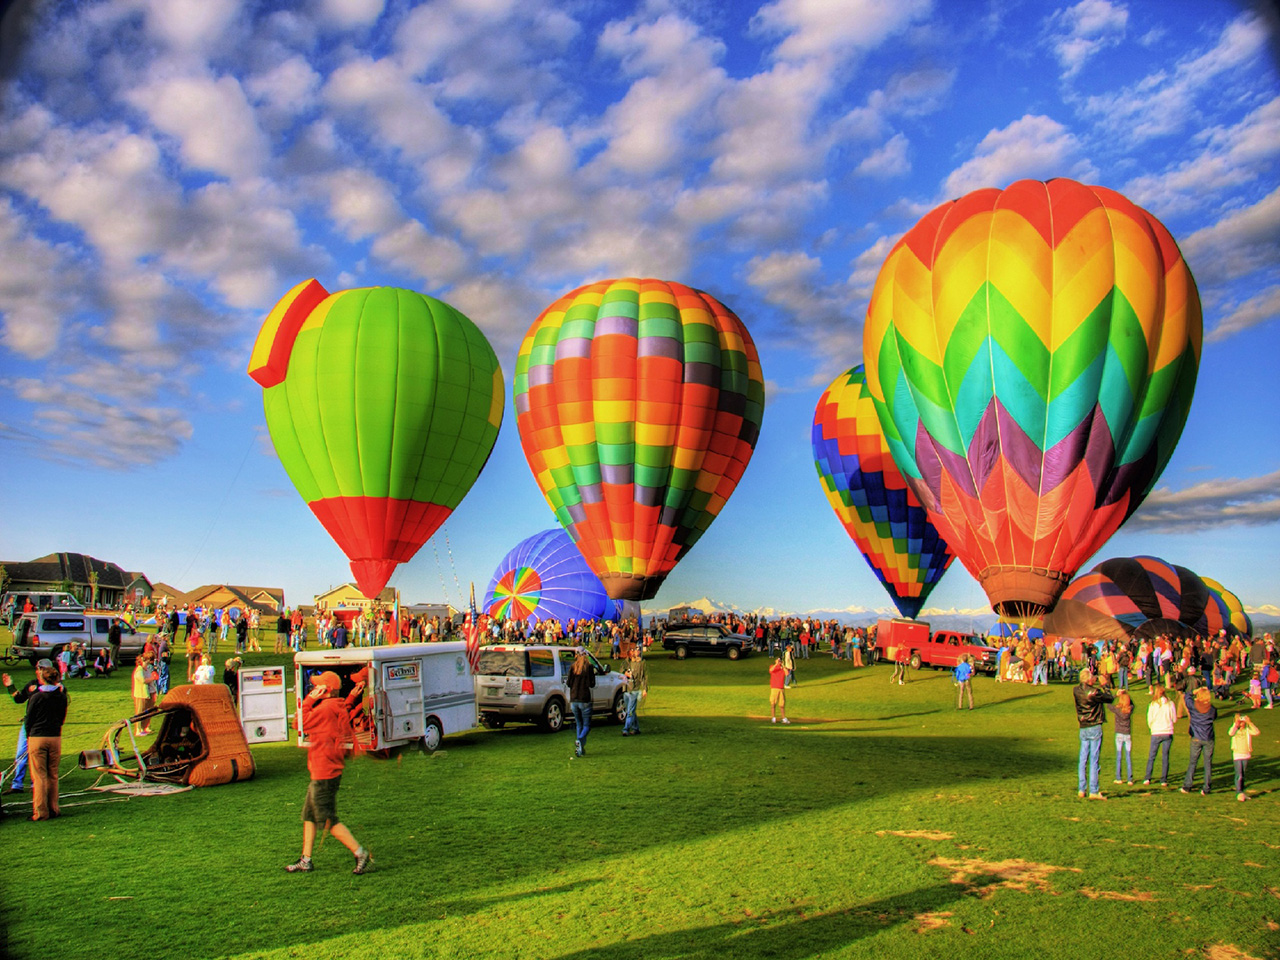  19 2015 By Stephen Comments Off on Hot Air Balloons Wallpapers